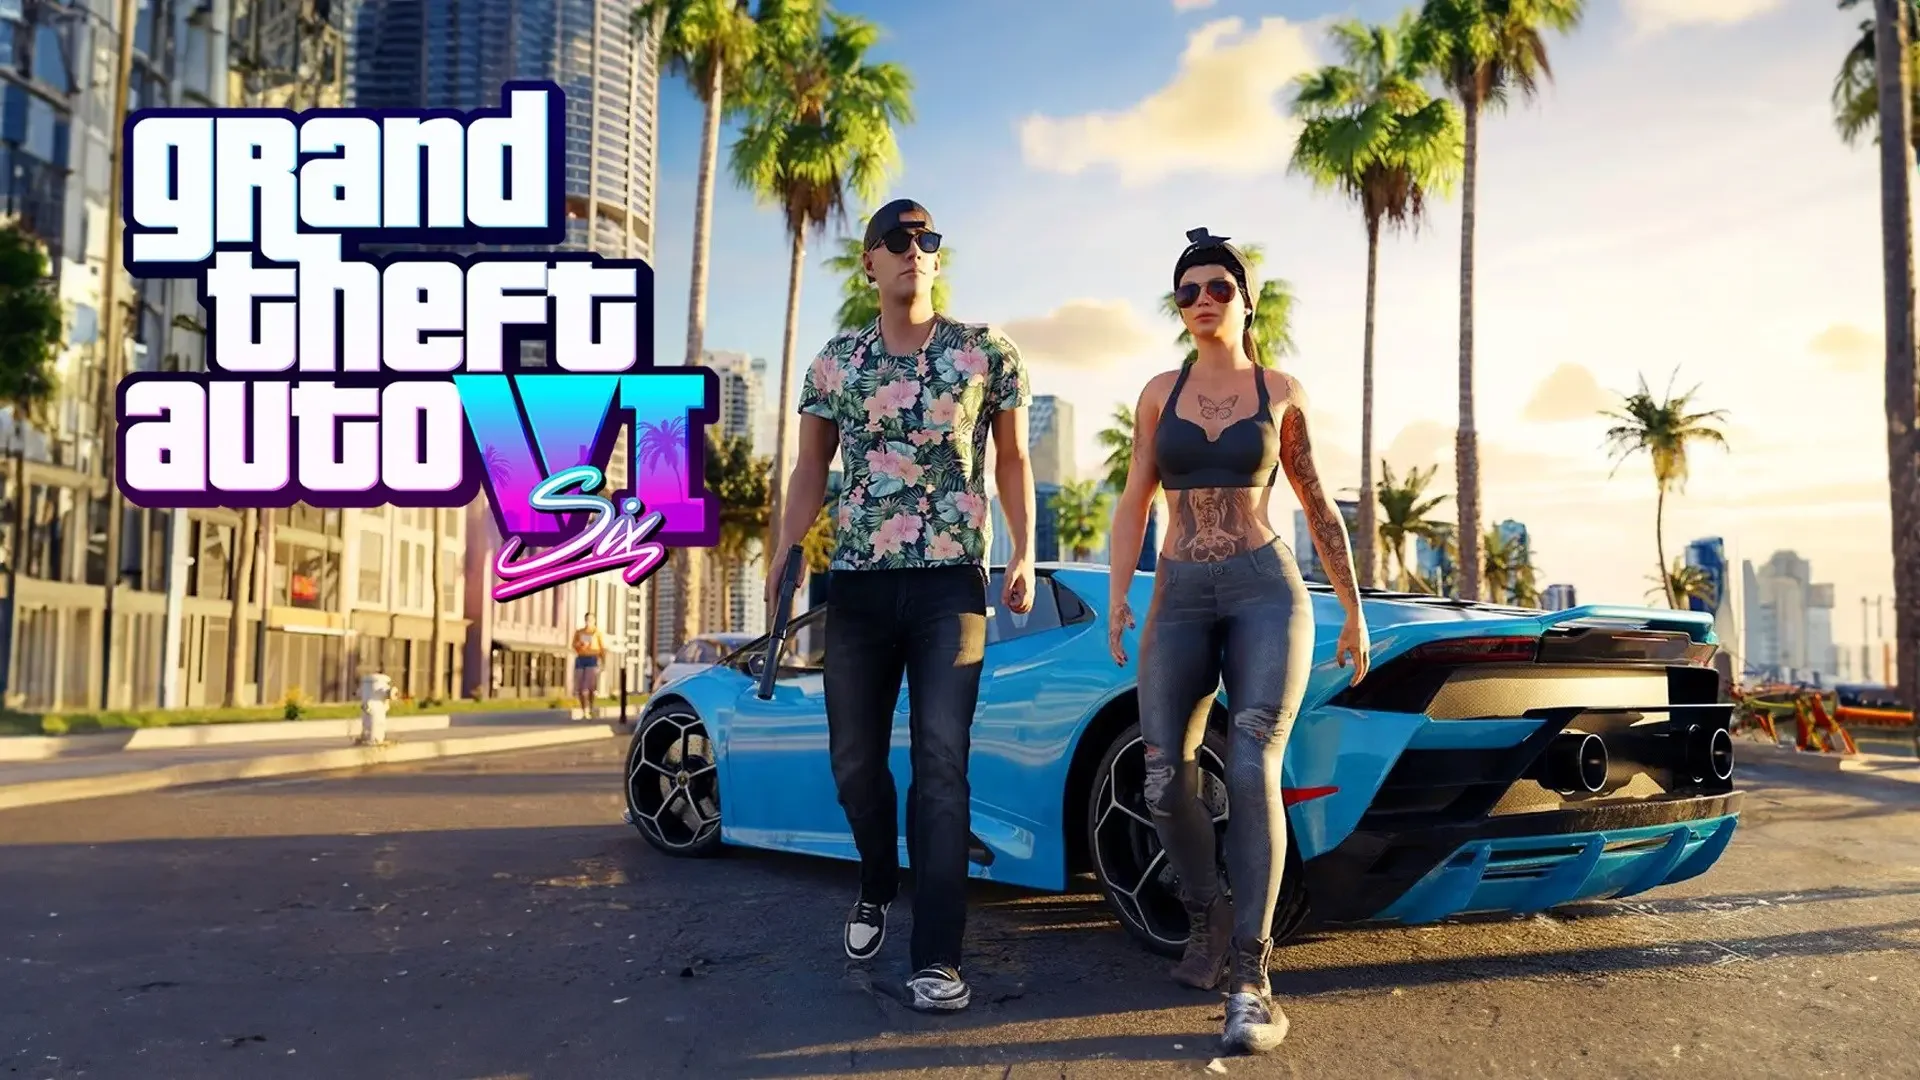 Rumors: the second GTA 6 trailer may be released in April